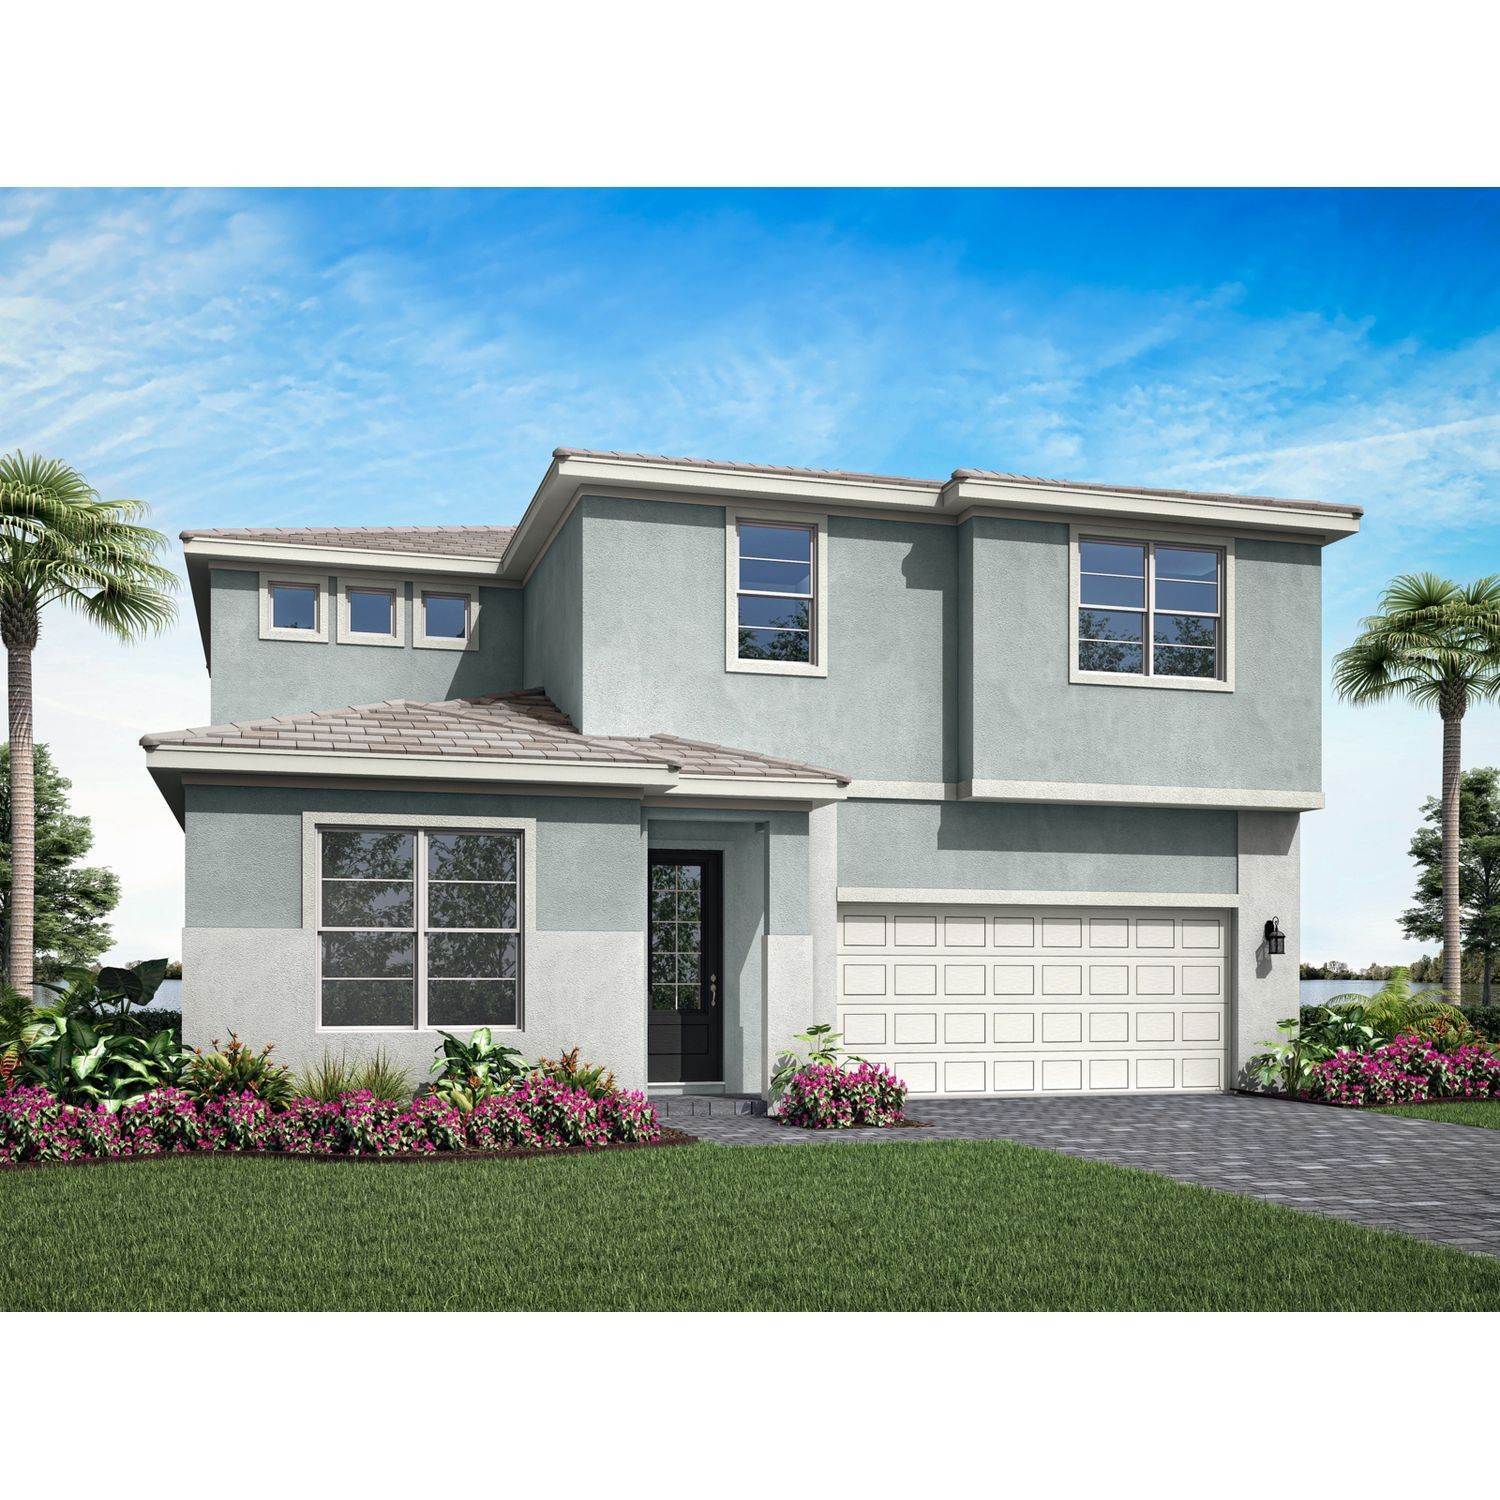 Single Family for Sale at Port St. Lucie, FL 34987